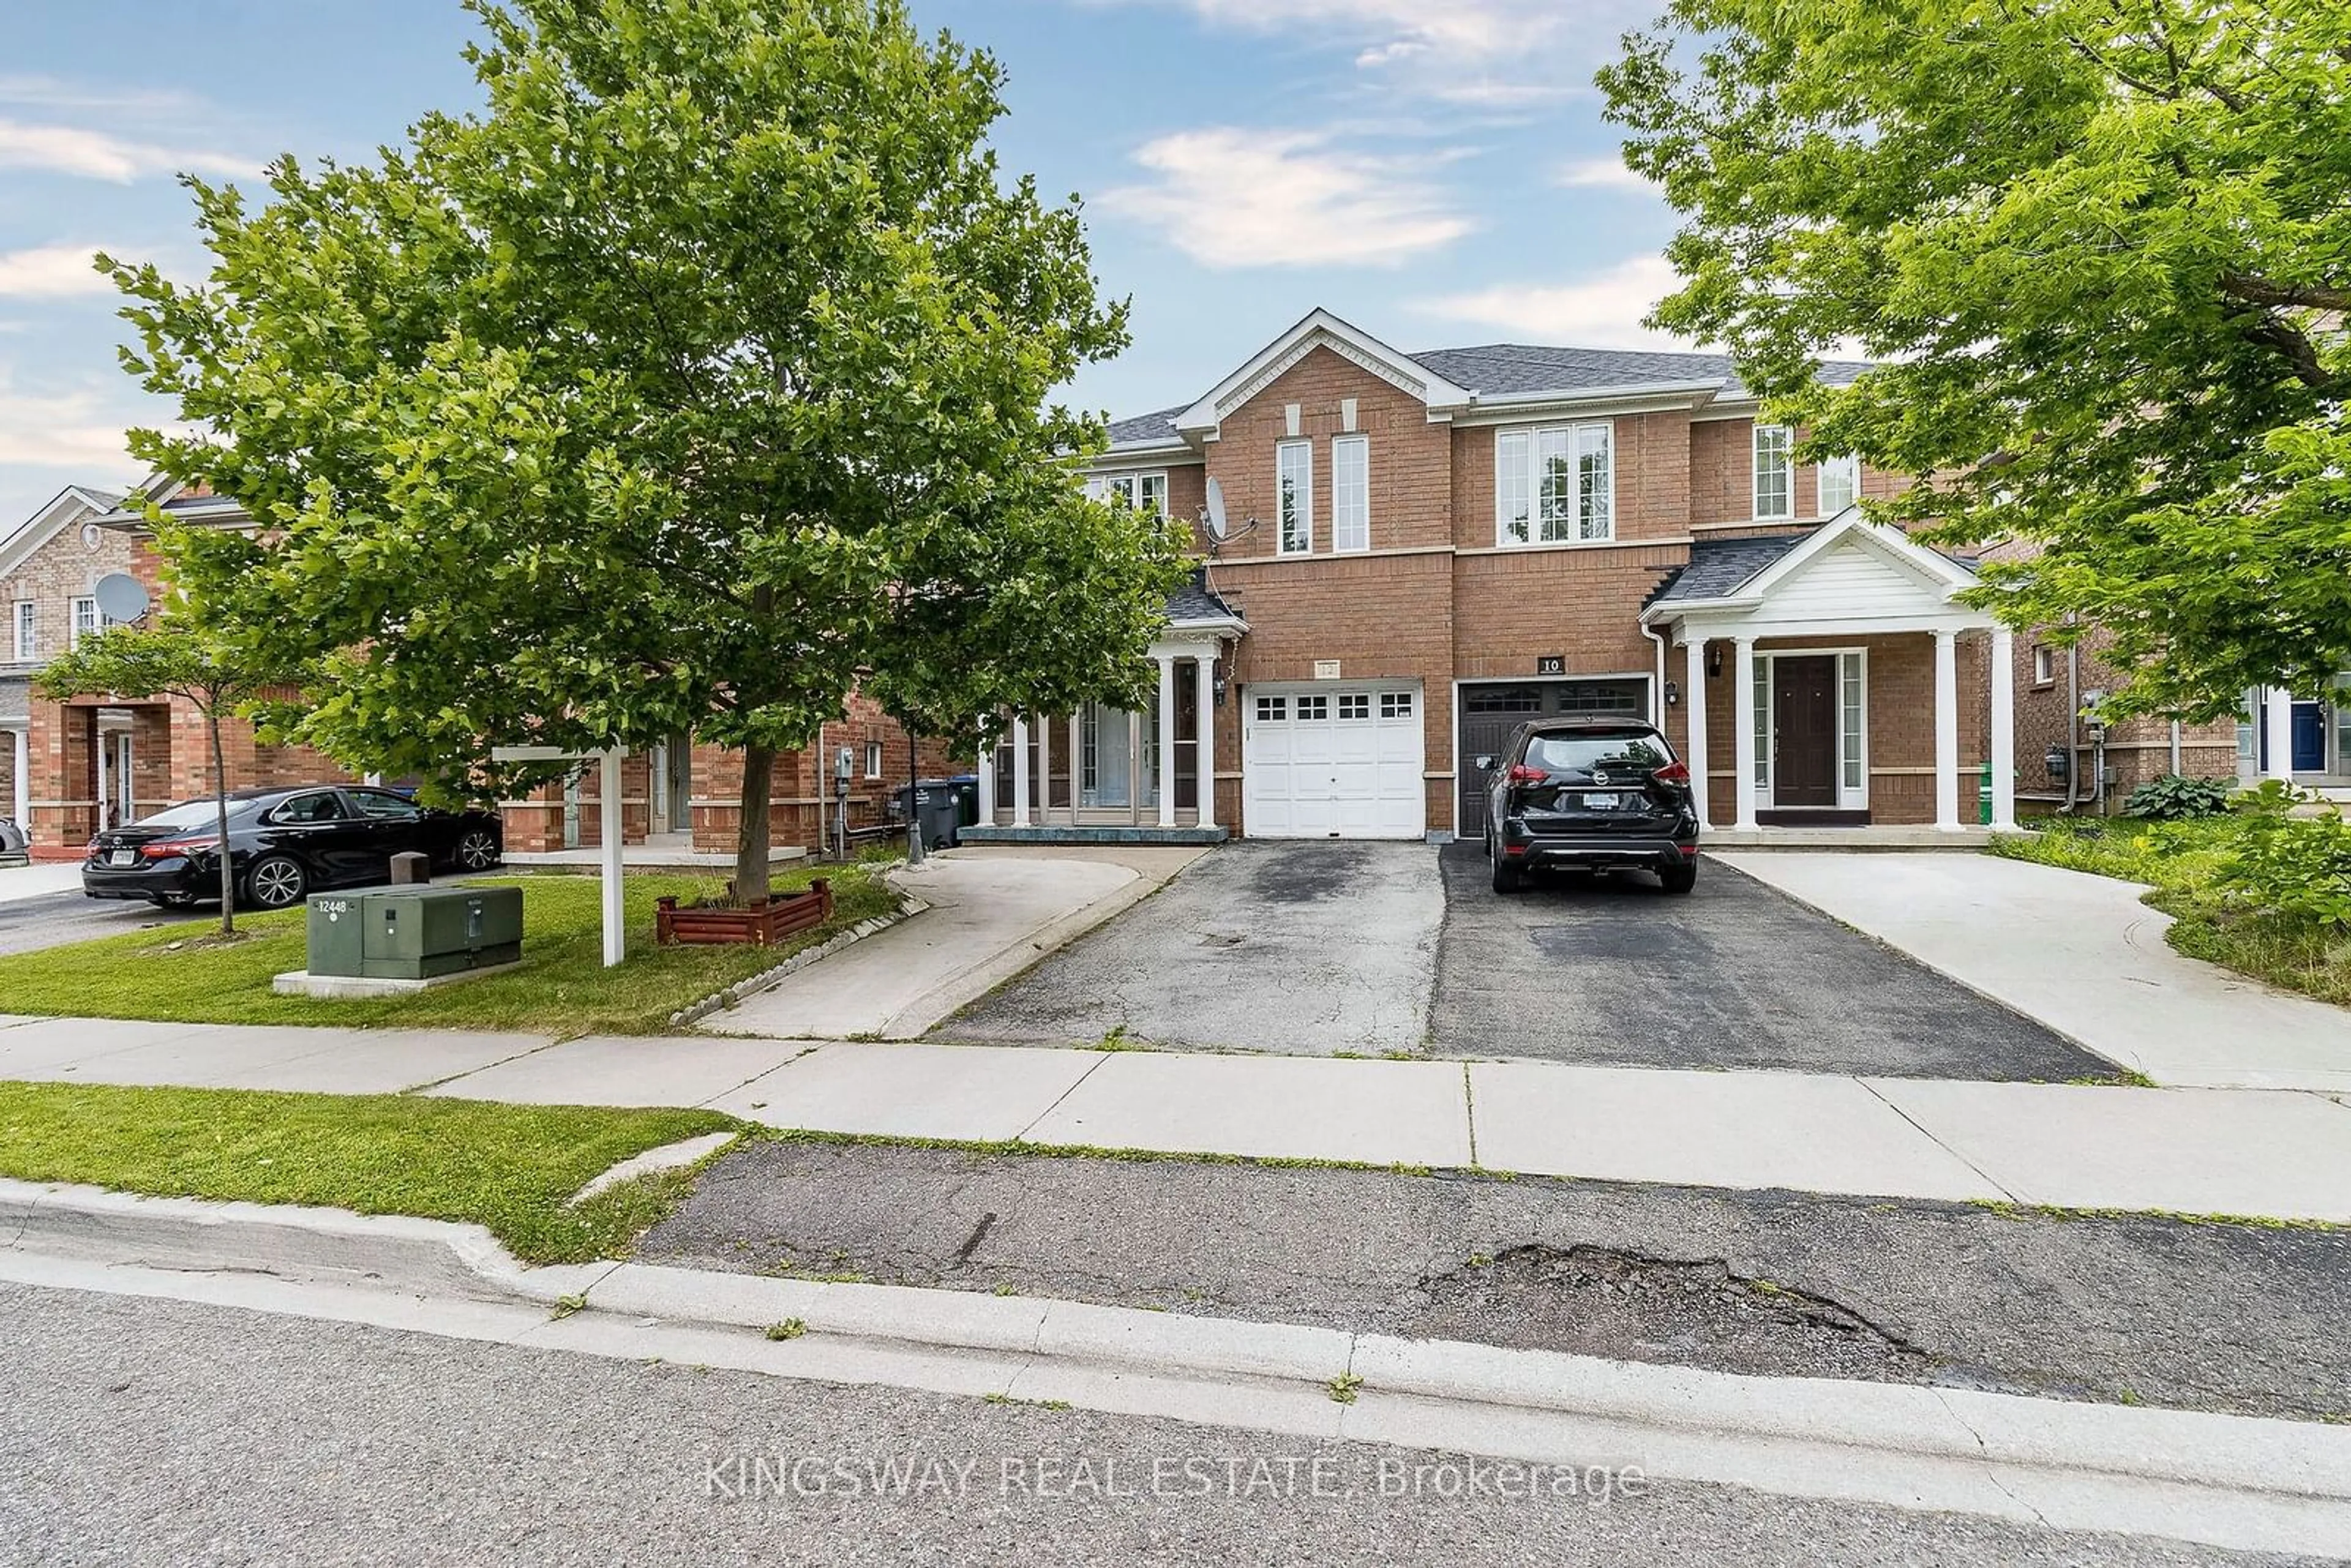 Home with brick exterior material for 12 Tanglemere Cres, Brampton Ontario L7A 1R7